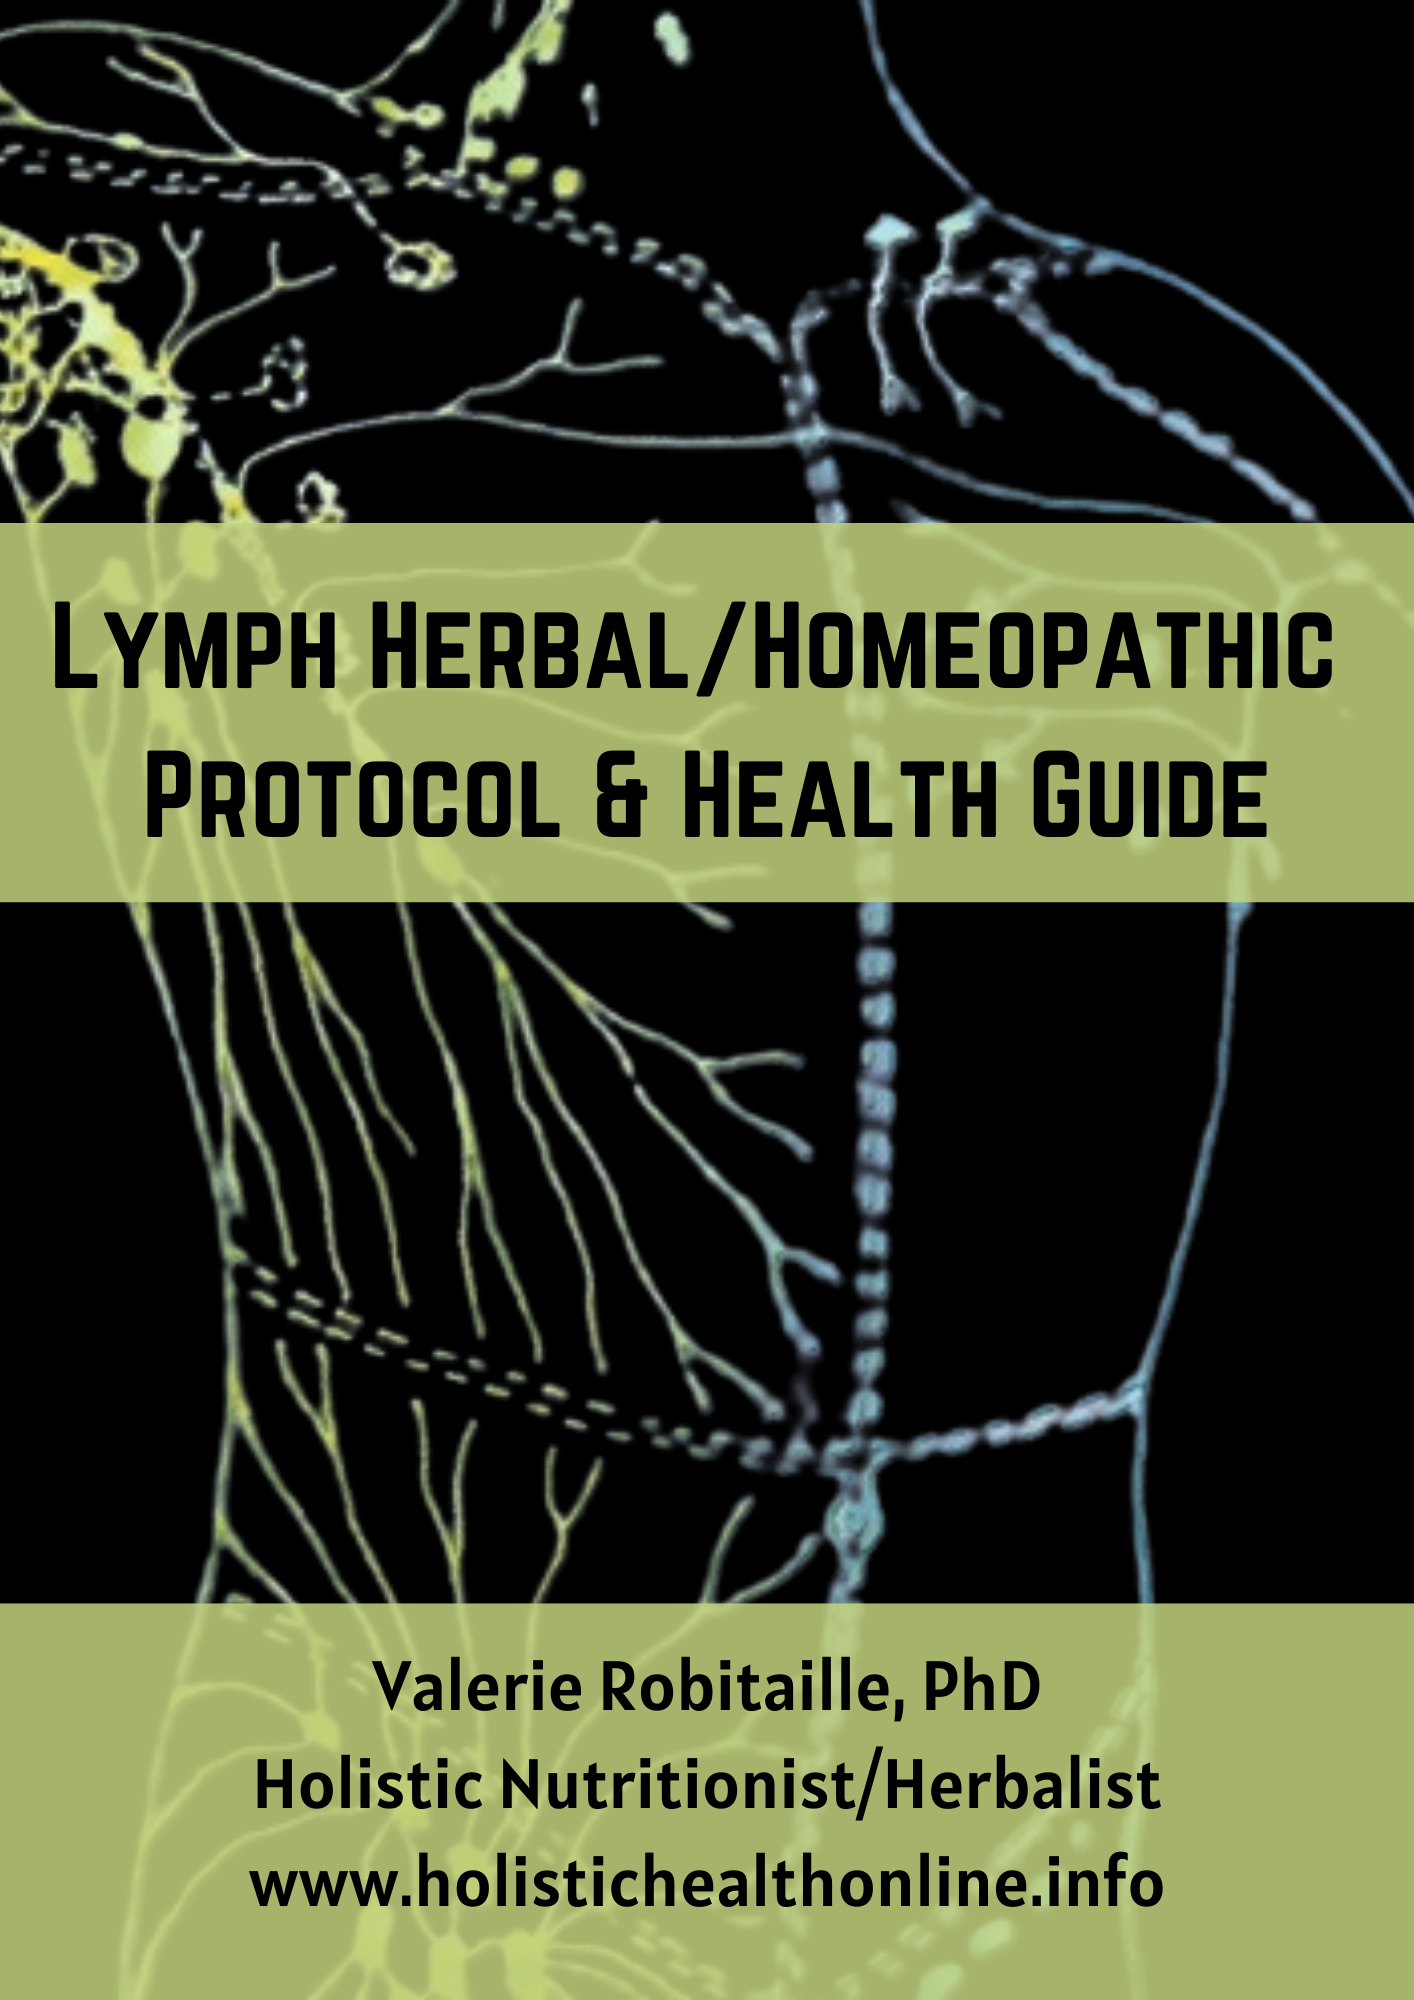 Lymph HerbalHomeopathic Protocol Health Guide Health Protocols